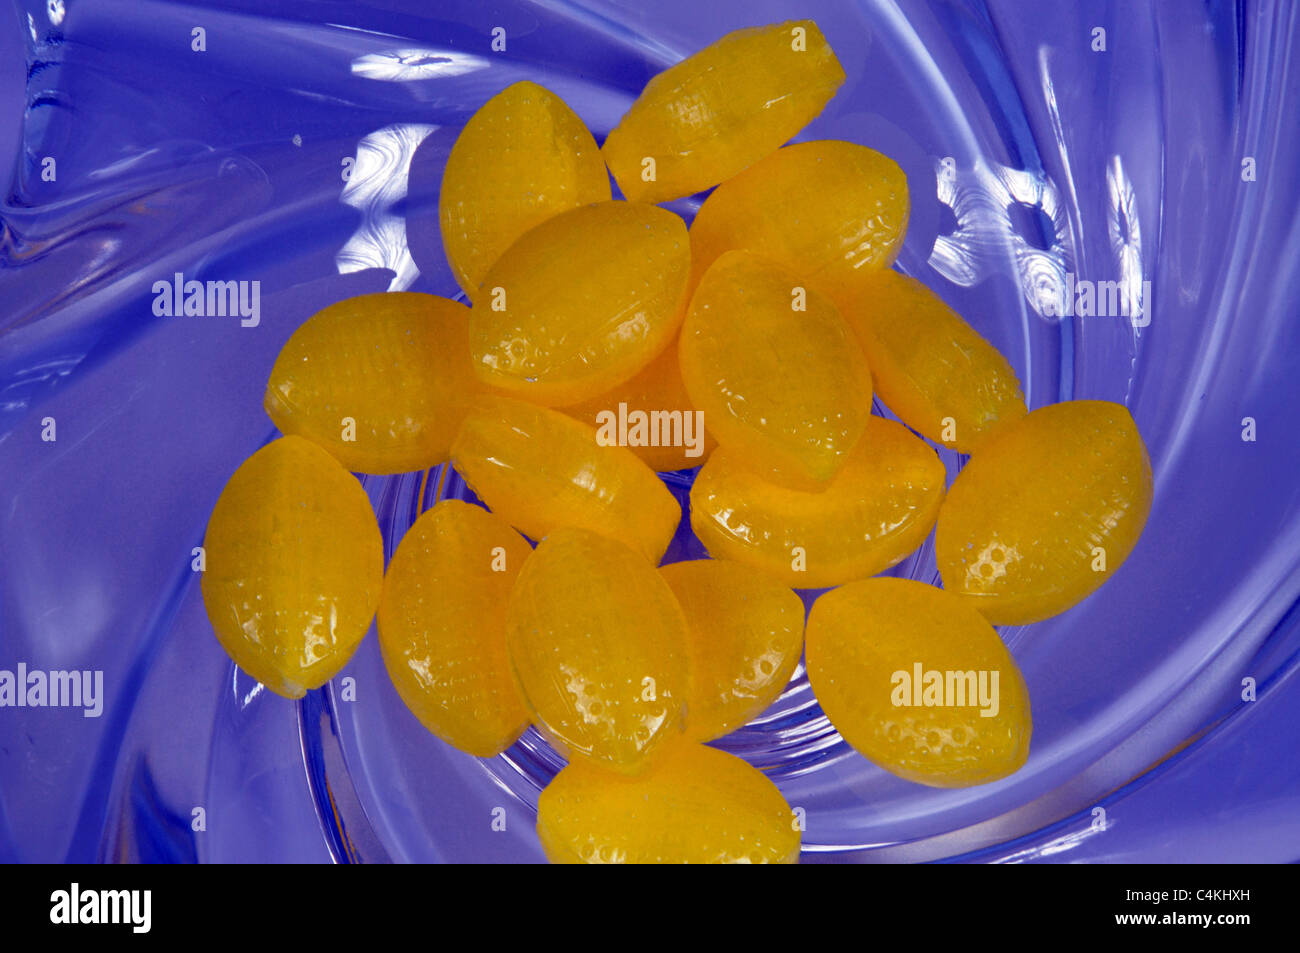 Blue glass dish with Sherbet Lemons, Urb. Calypso, Costa del Sol, Malaga Province, Andalucia, Spain, Western Europe. Stock Photo